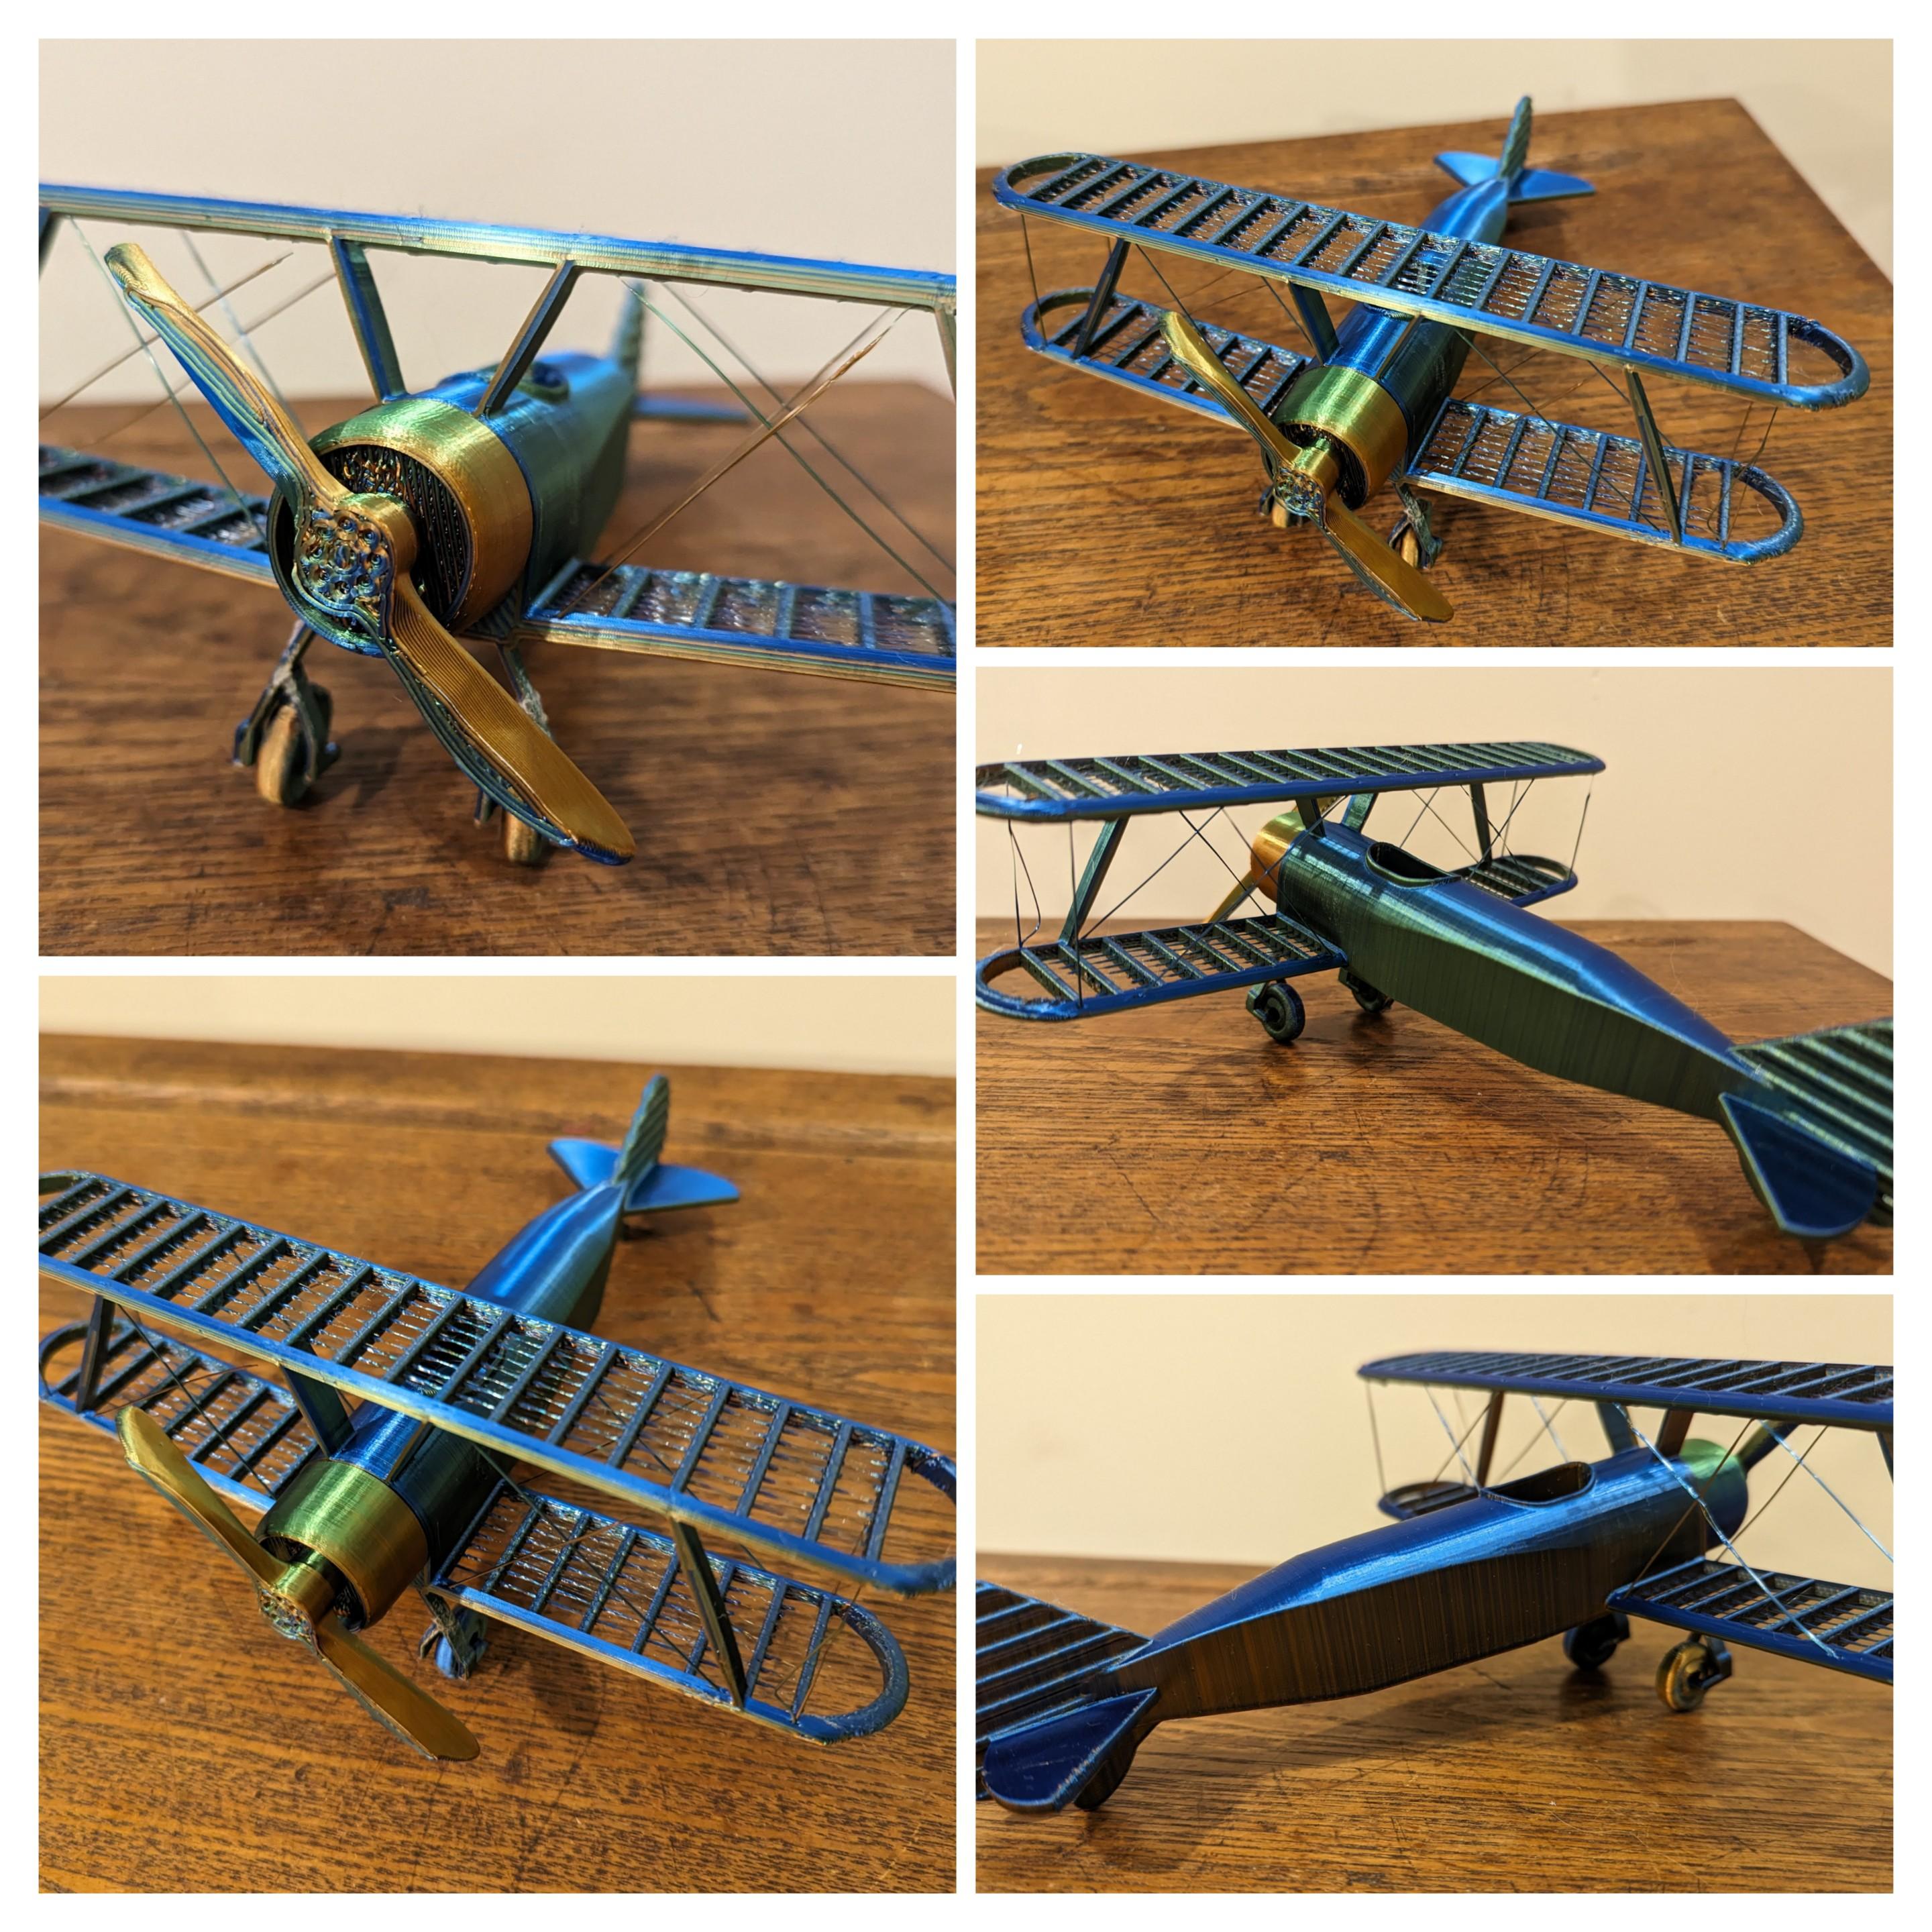 String Biplane:  No Supports - Printed in @SliceWorx3D TriColor coextrusion blue green orange - 3d model